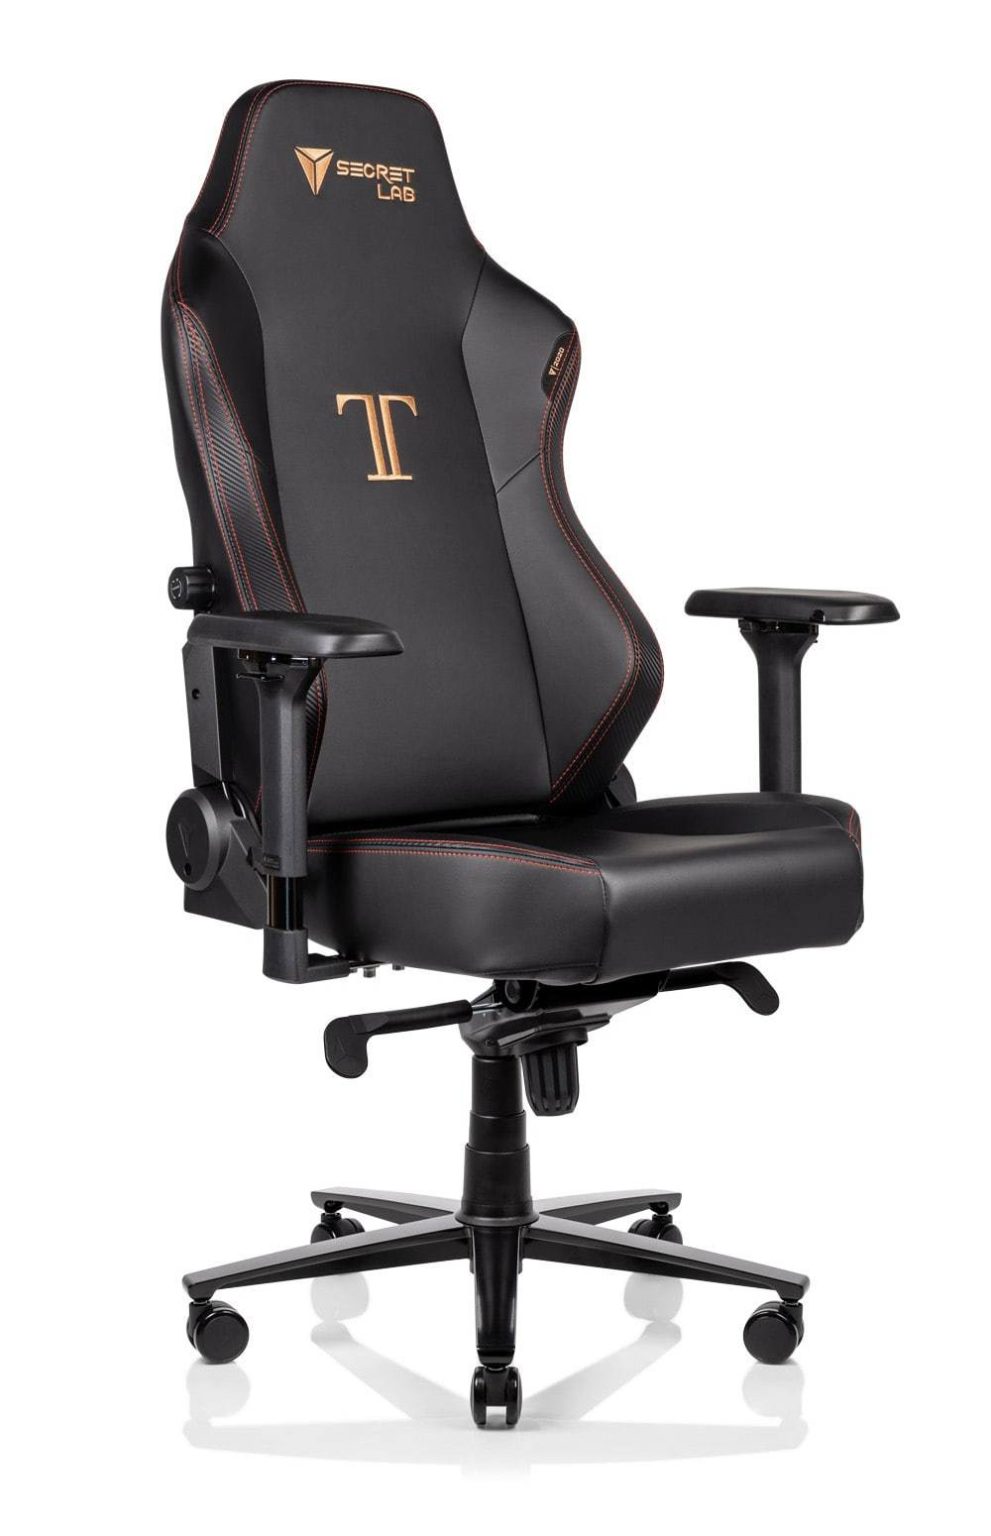 The 10 most comfortable gaming chairs of 2021 | Most ergonomic gaming